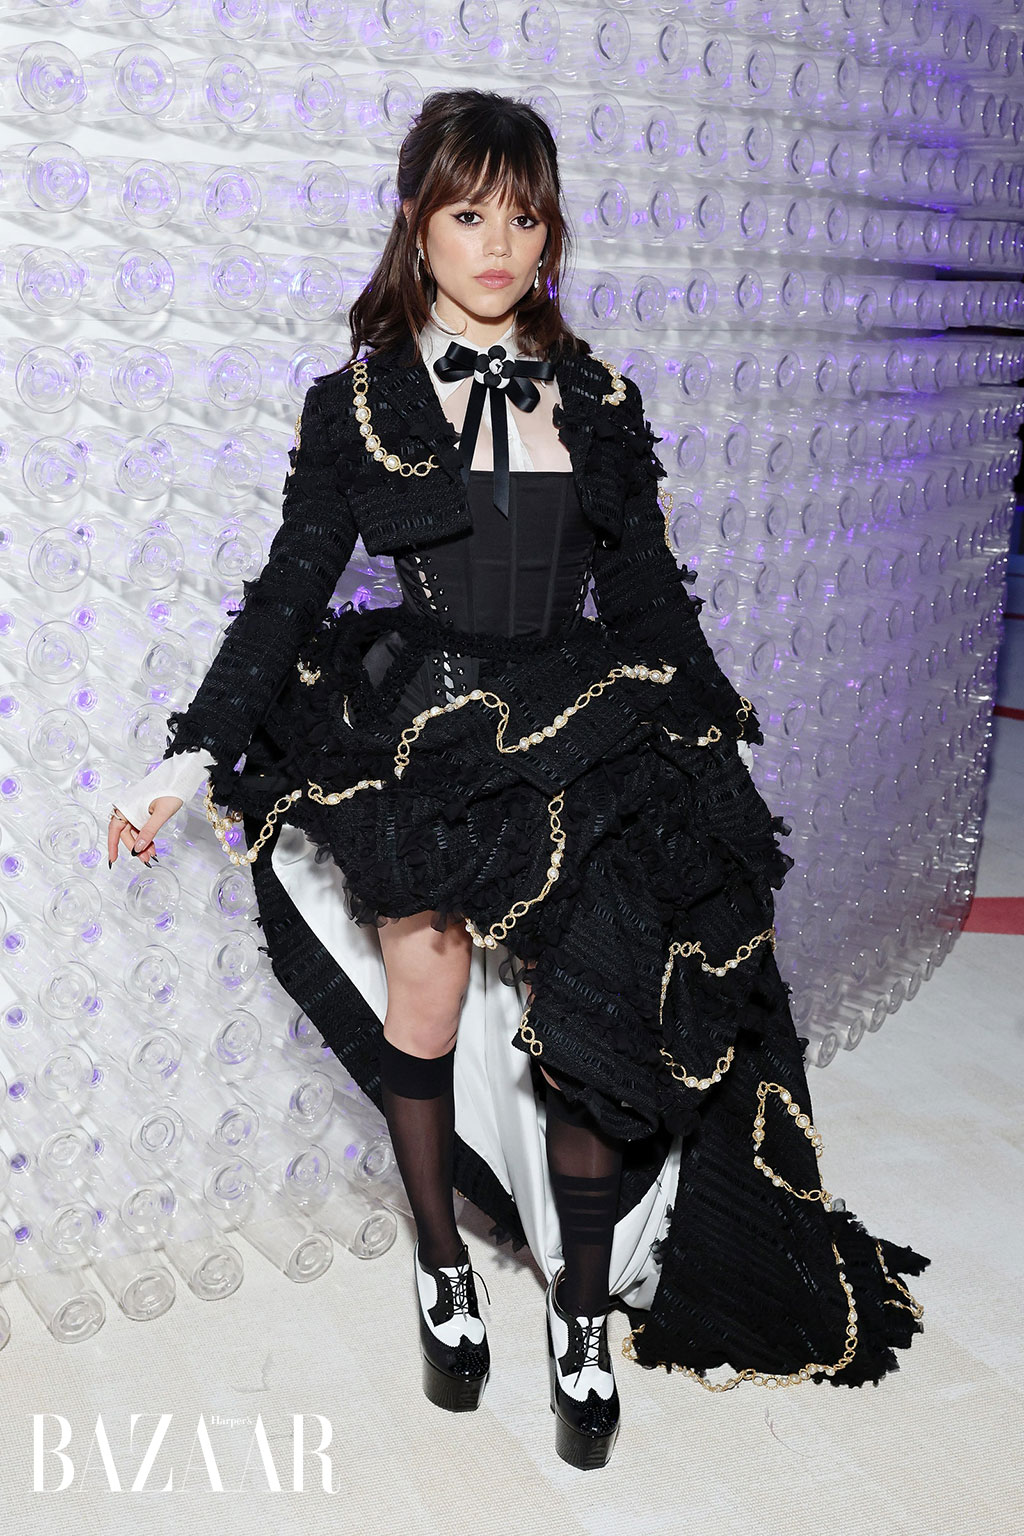 Jenna ortega combines Karl Lagerfeld and Wednesday on the met gala red carpet